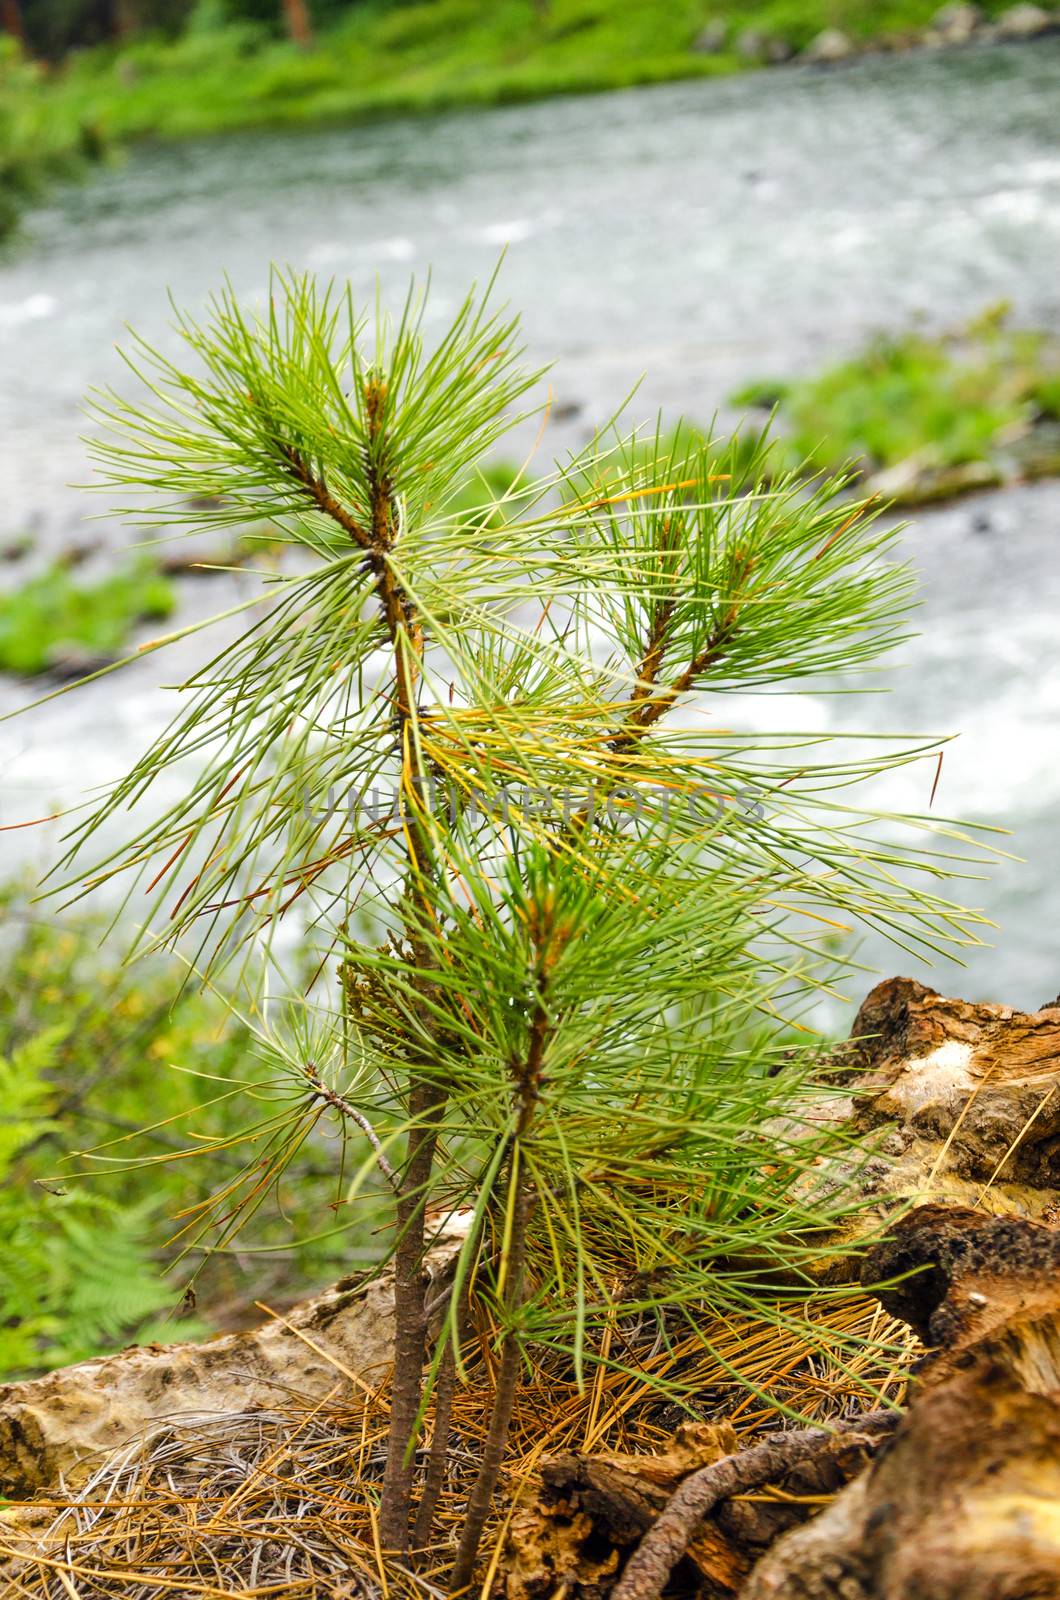 Small pine tree sapling growing in a forest